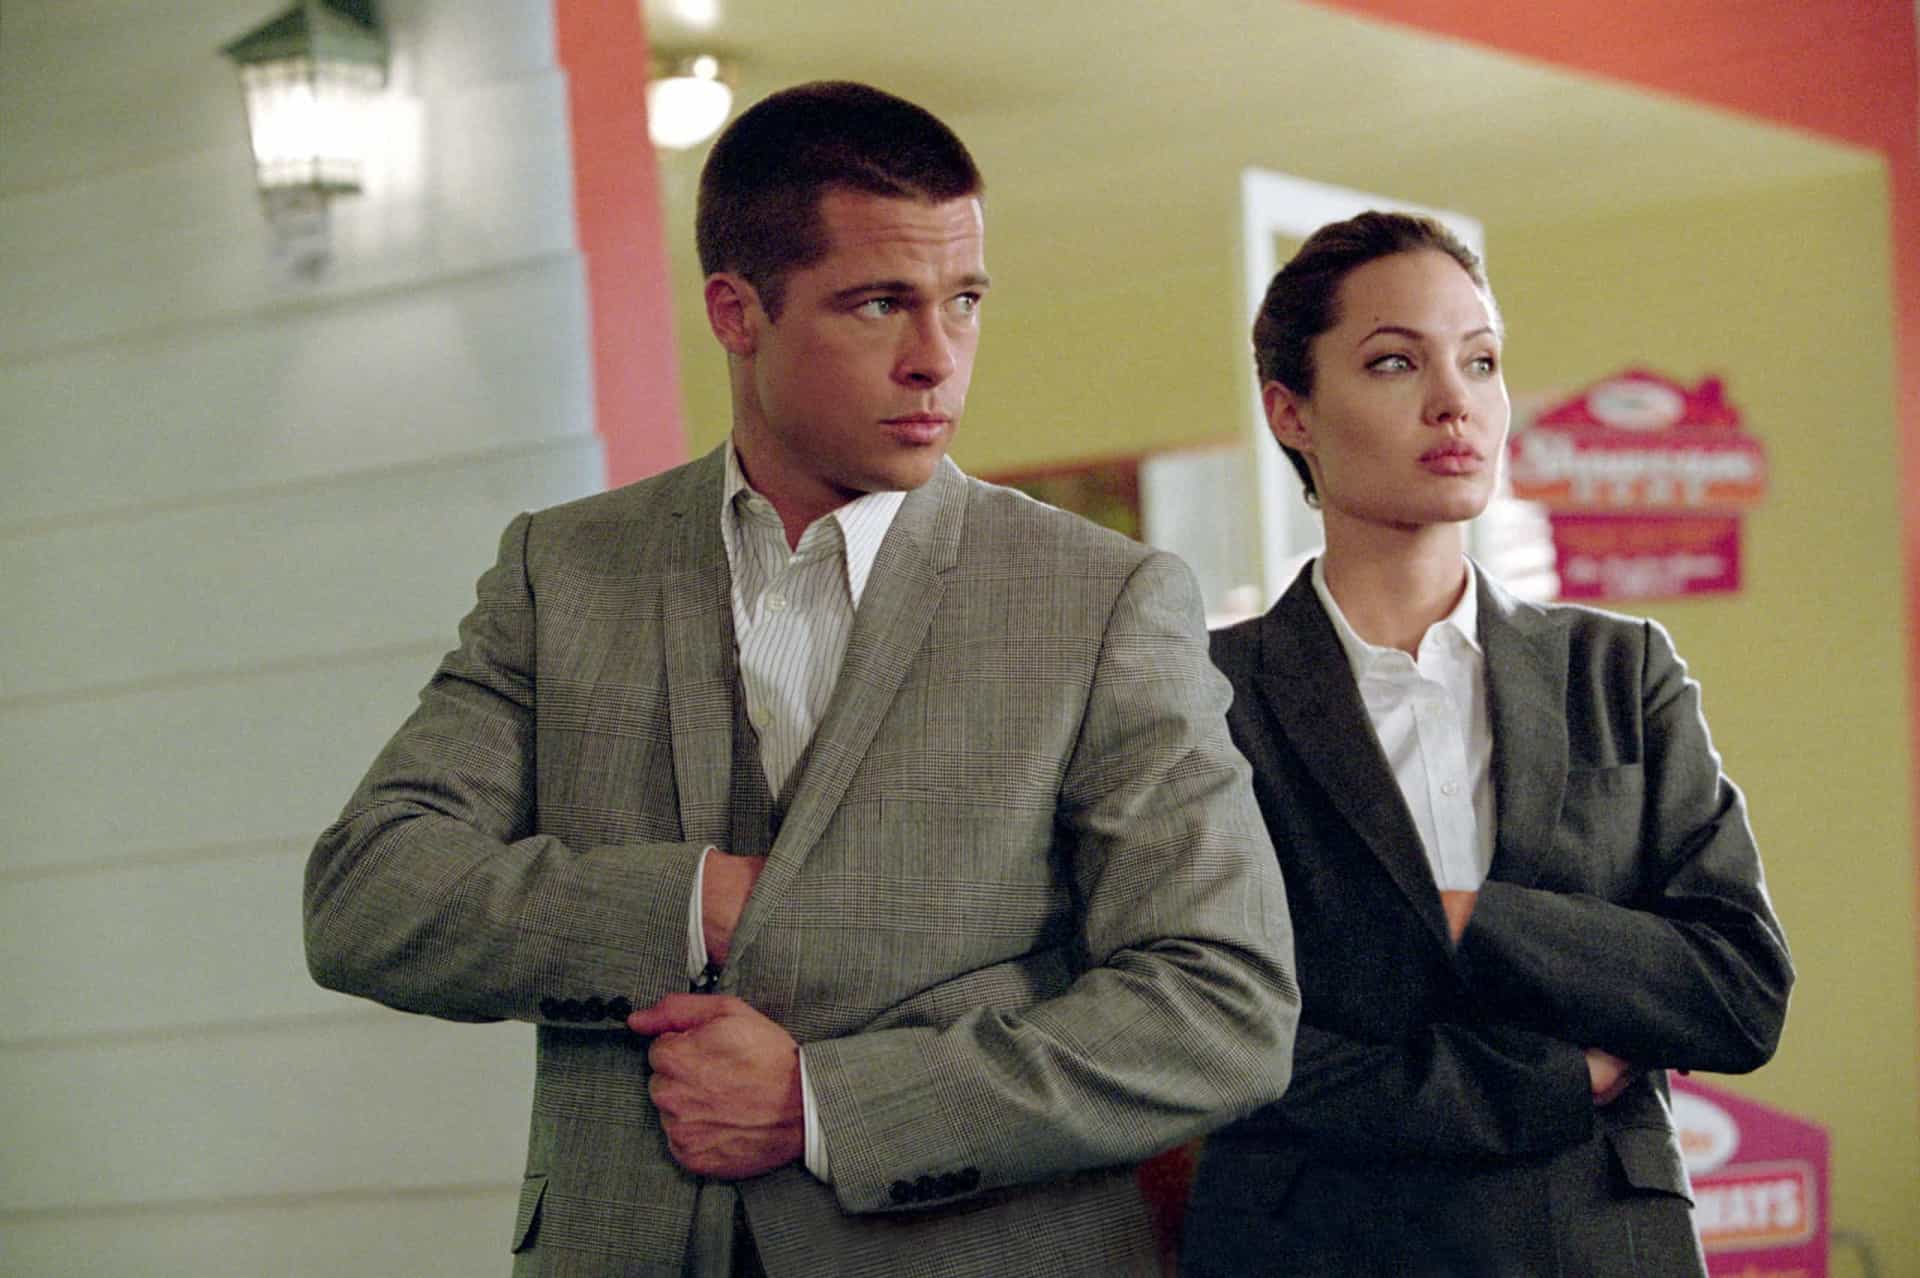 <p>But 2005's 'Mr. & Mrs. Smith,' on the other hand, has a couple (Brad Pitt and Angelina Jolie) discovering that they are both assassins and  have been hired by different agencies to kill each other.</p><p>You may also like:<a href="https://www.starsinsider.com/n/408996?utm_source=msn.com&utm_medium=display&utm_campaign=referral_description&utm_content=519875en-us"> The British royal family at the races</a></p>